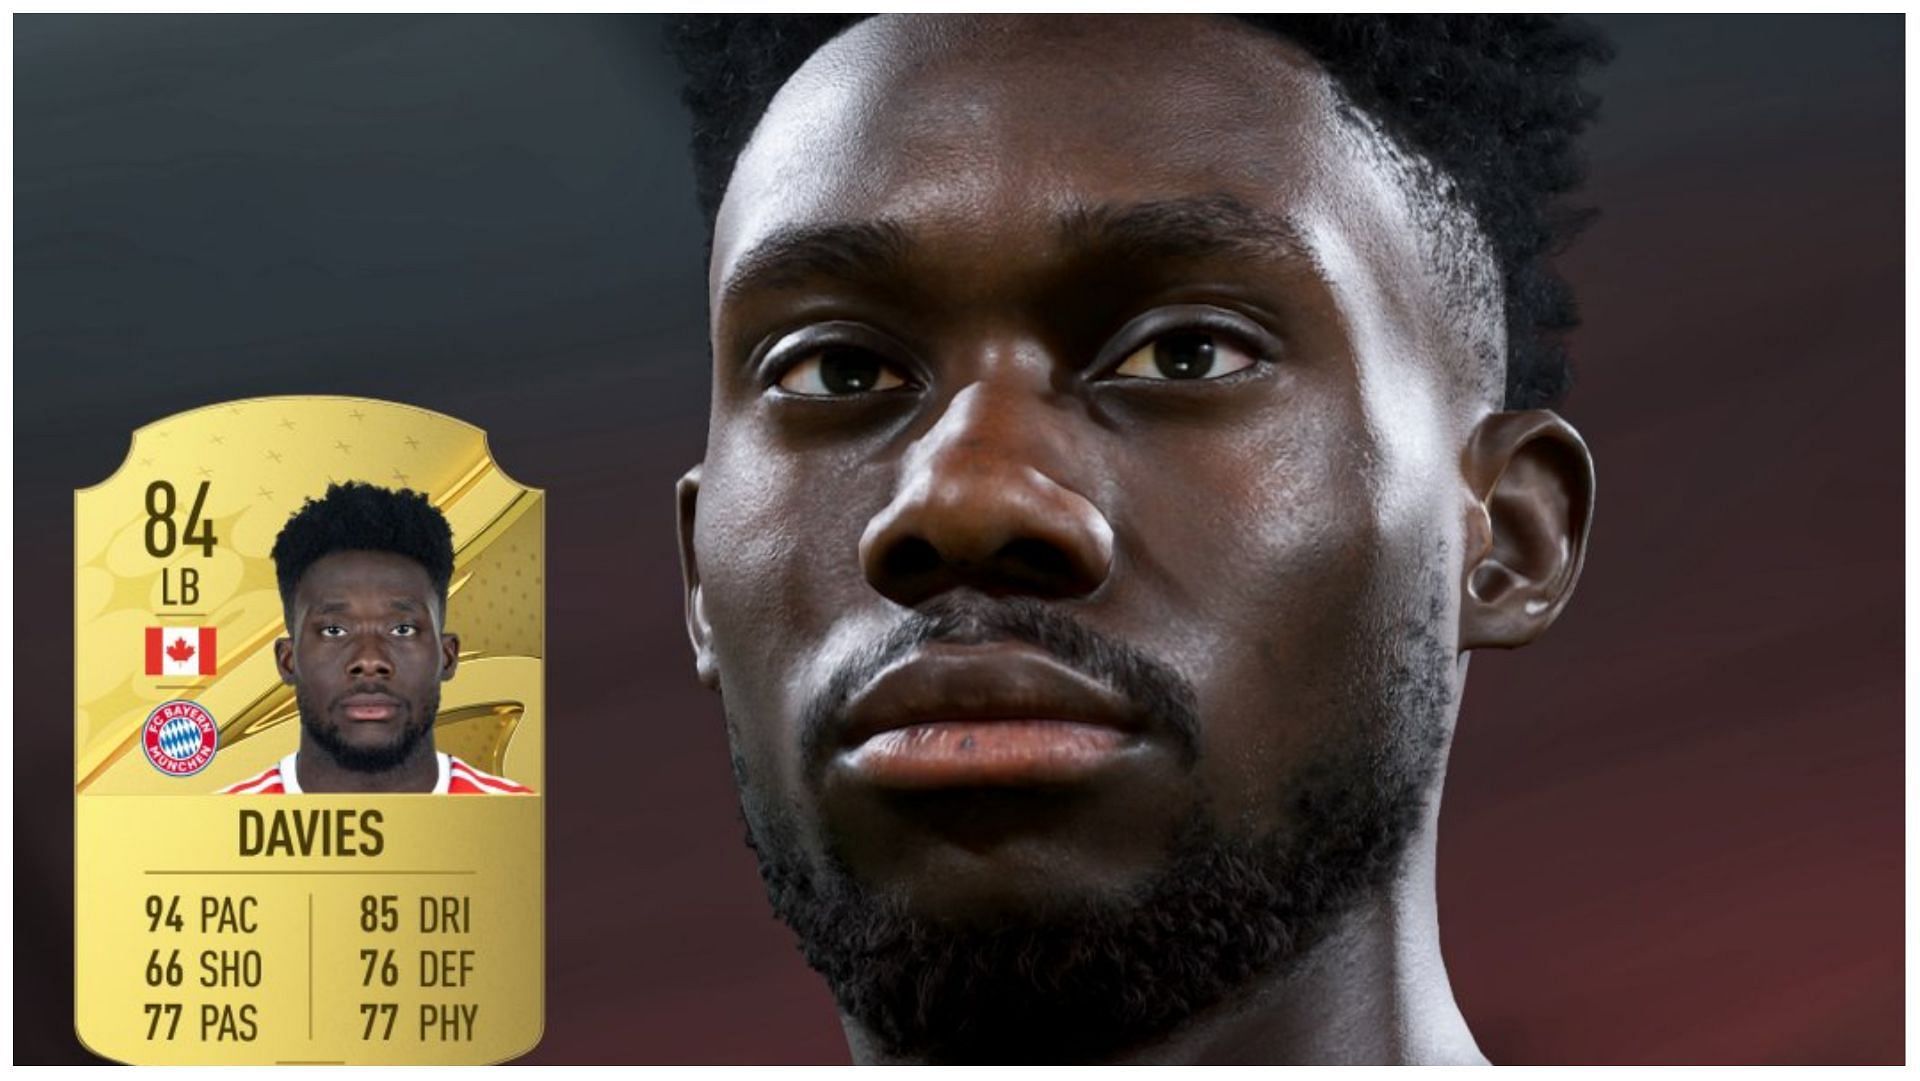 Alphonso Davies has been included in the list of FIFA 23 ambassadors (Image via EA Sports)